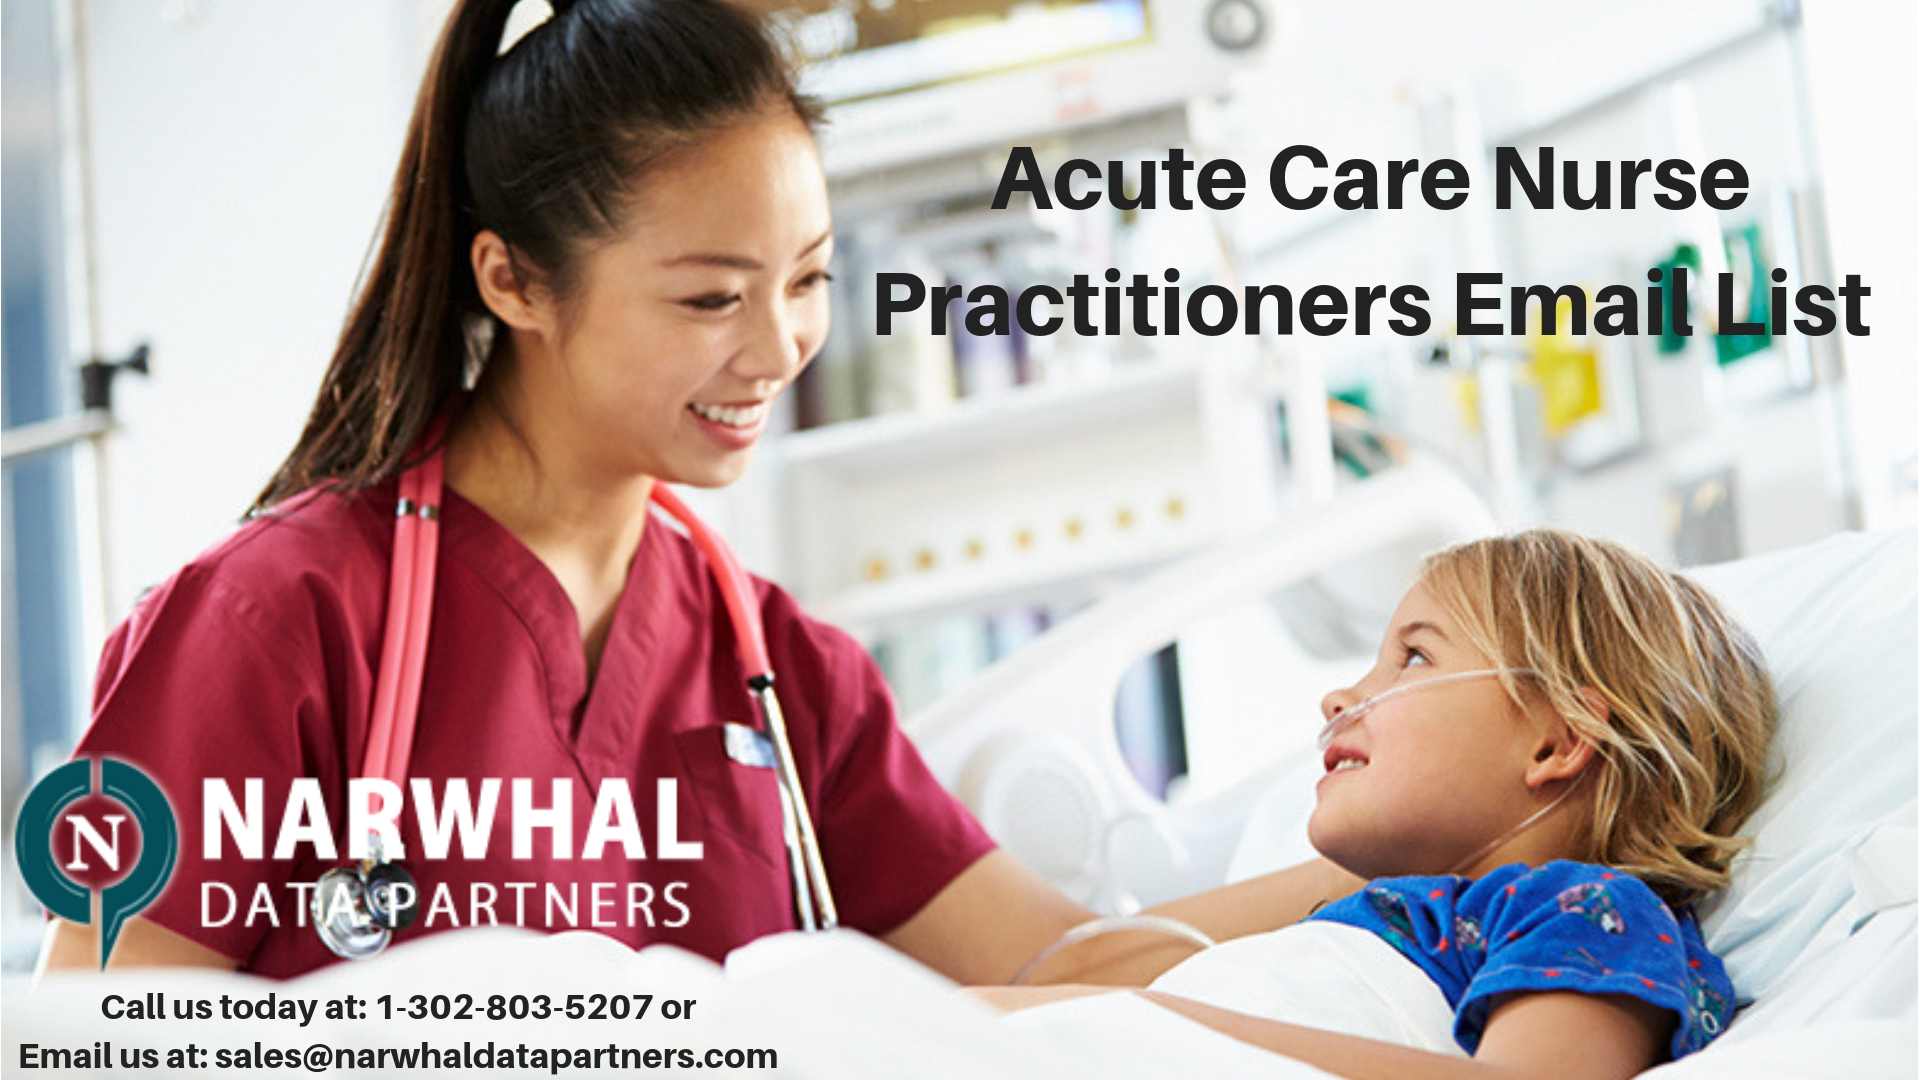 http://narwhaldatapartners.com/acute-care-nurse-practitioners-email-list.html